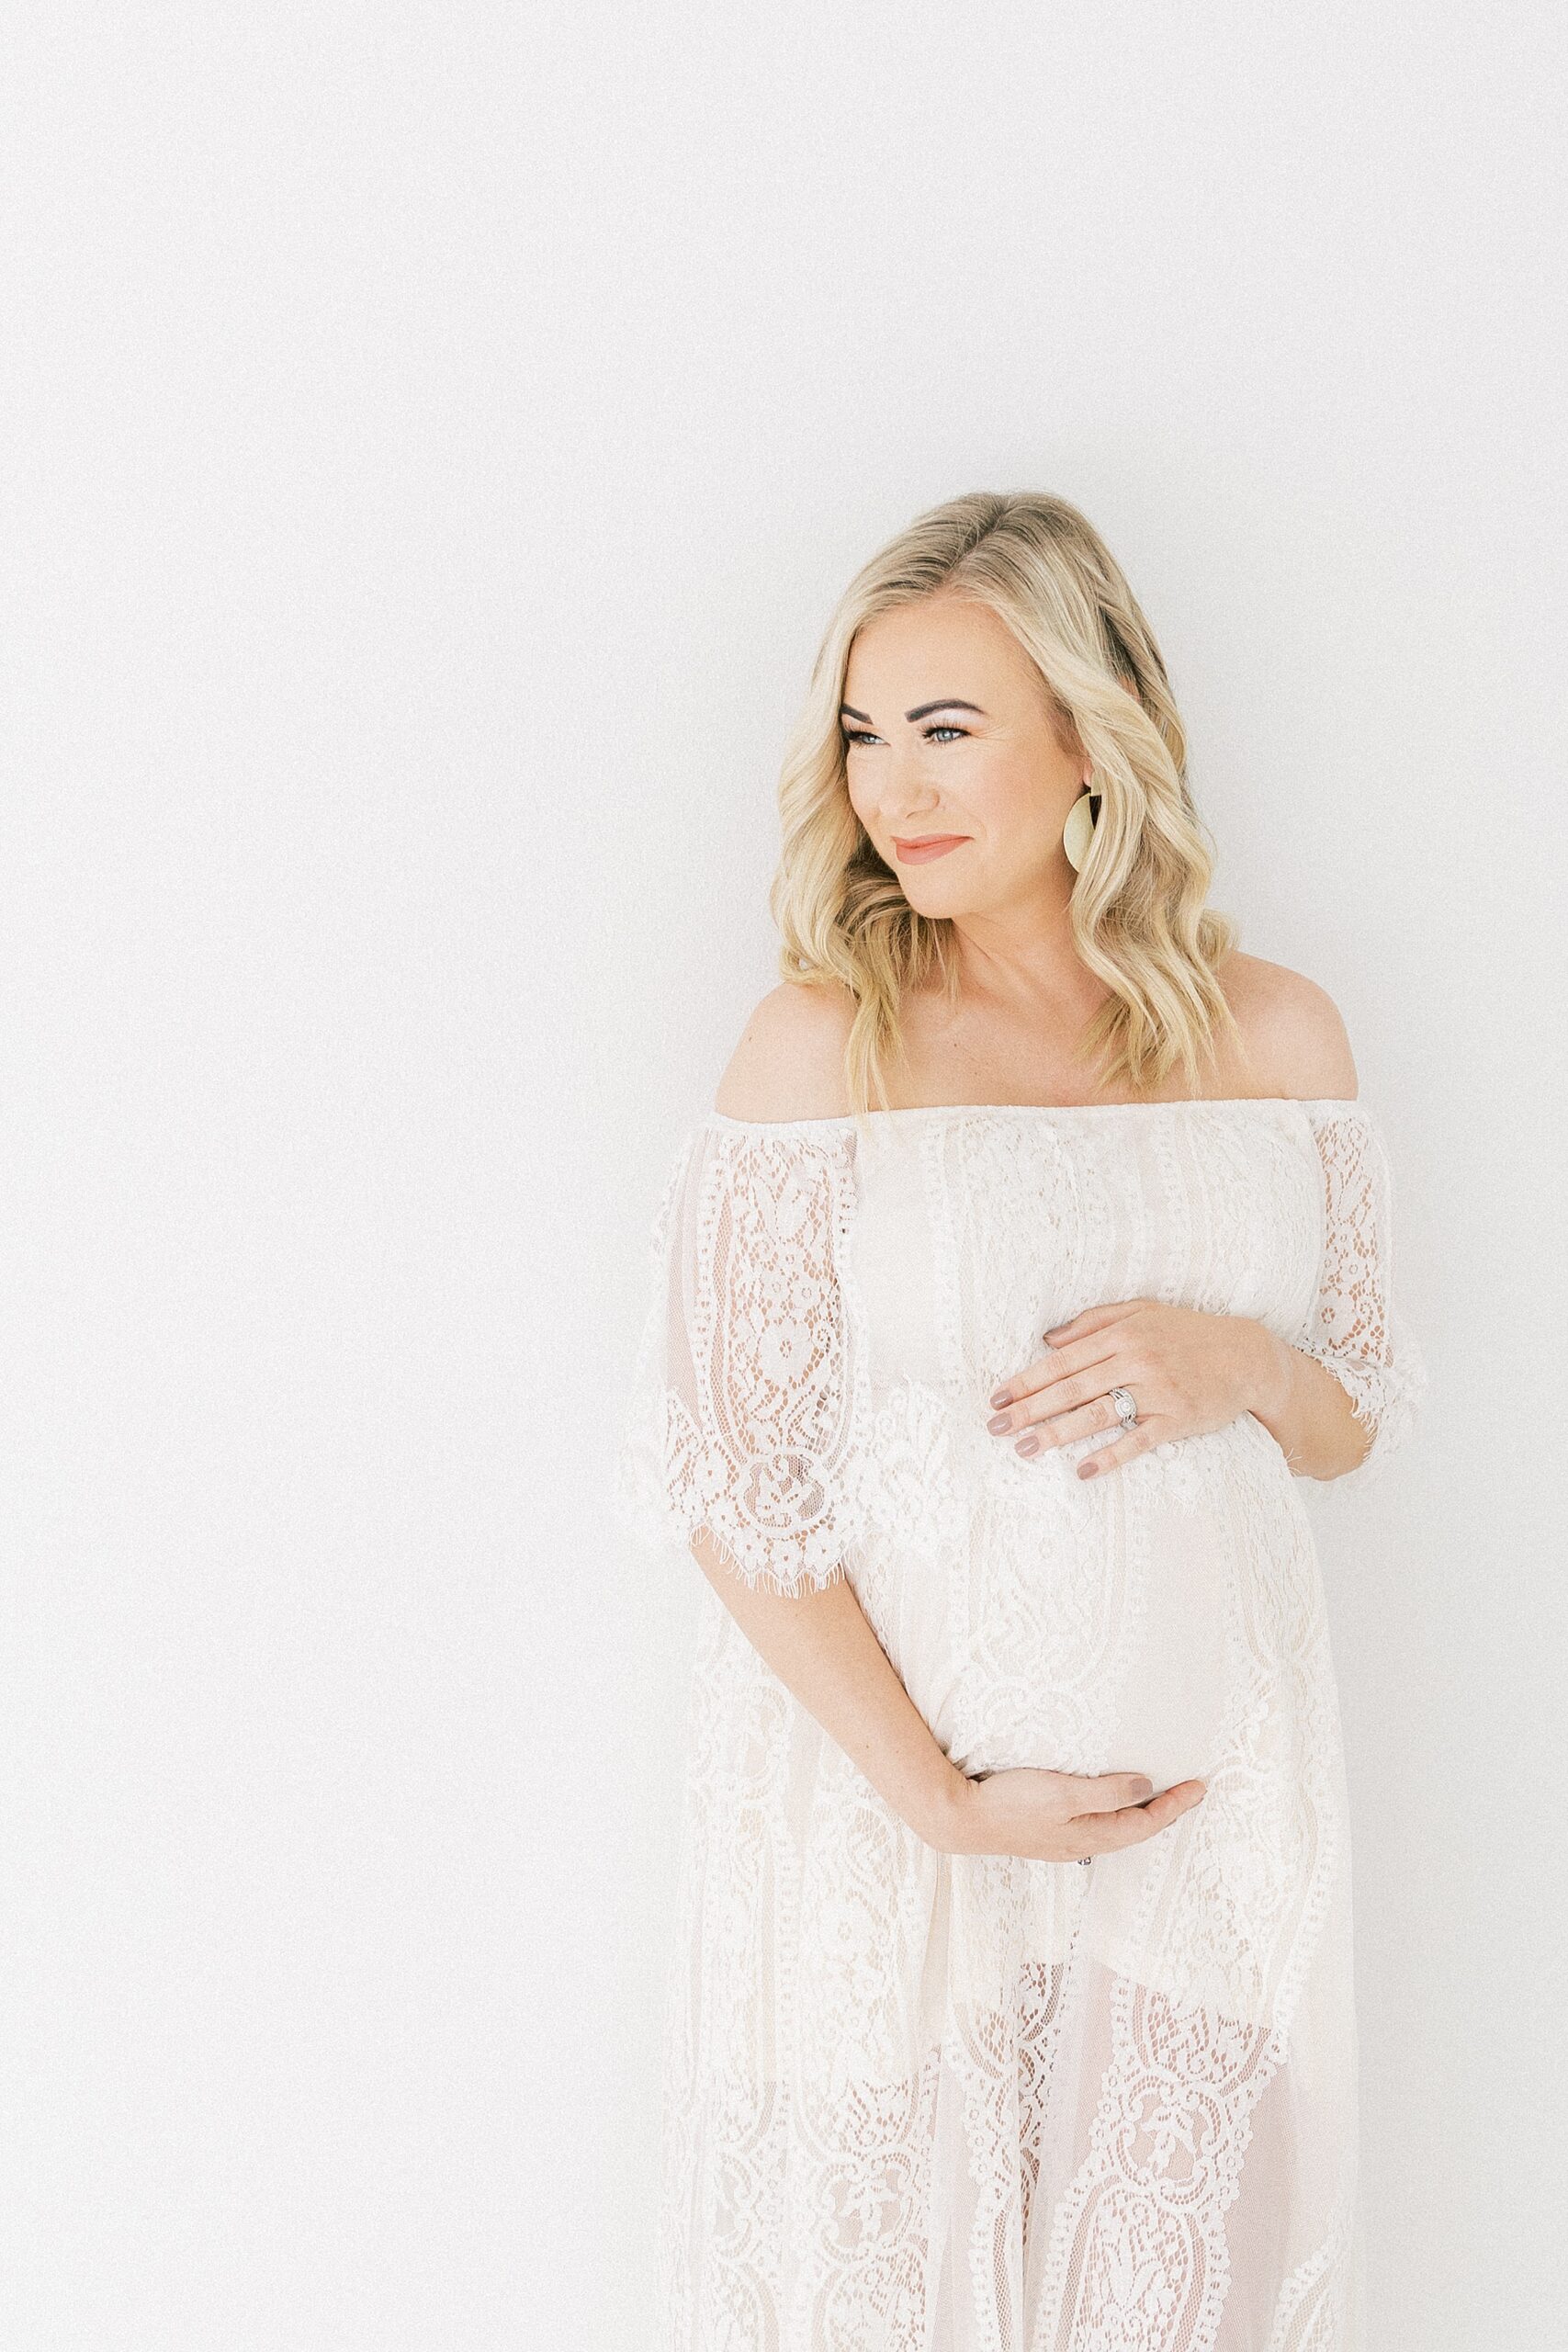 A pregnant woman with blonde hair stands in a studio in a white lace maternity dress dallas birth center